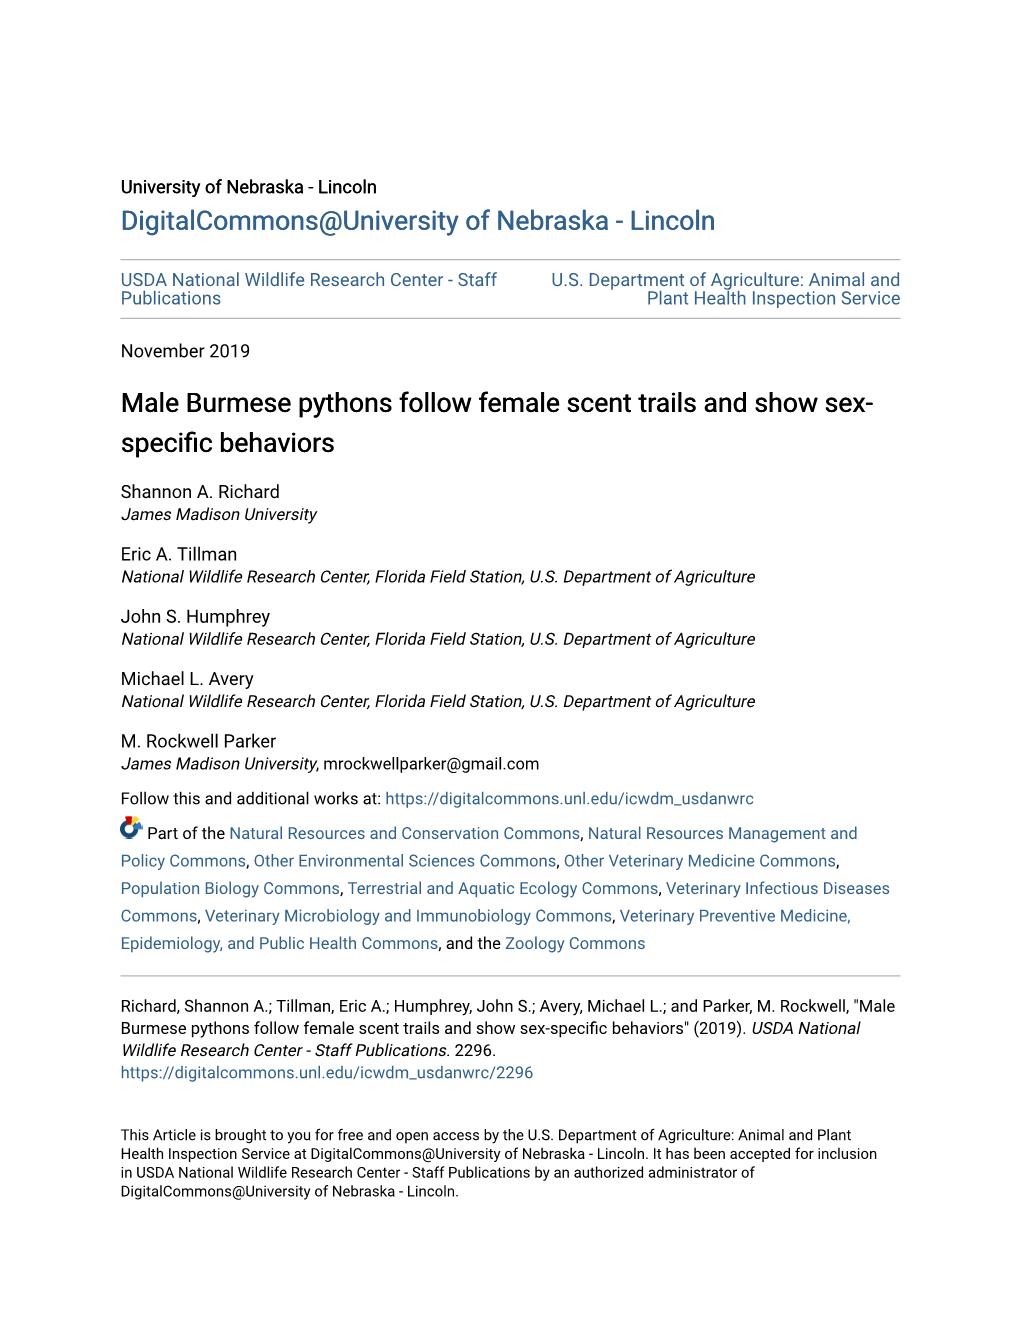 Male Burmese Pythons Follow Female Scent Trails and Show Sex-Specific Behaviors" (2019)